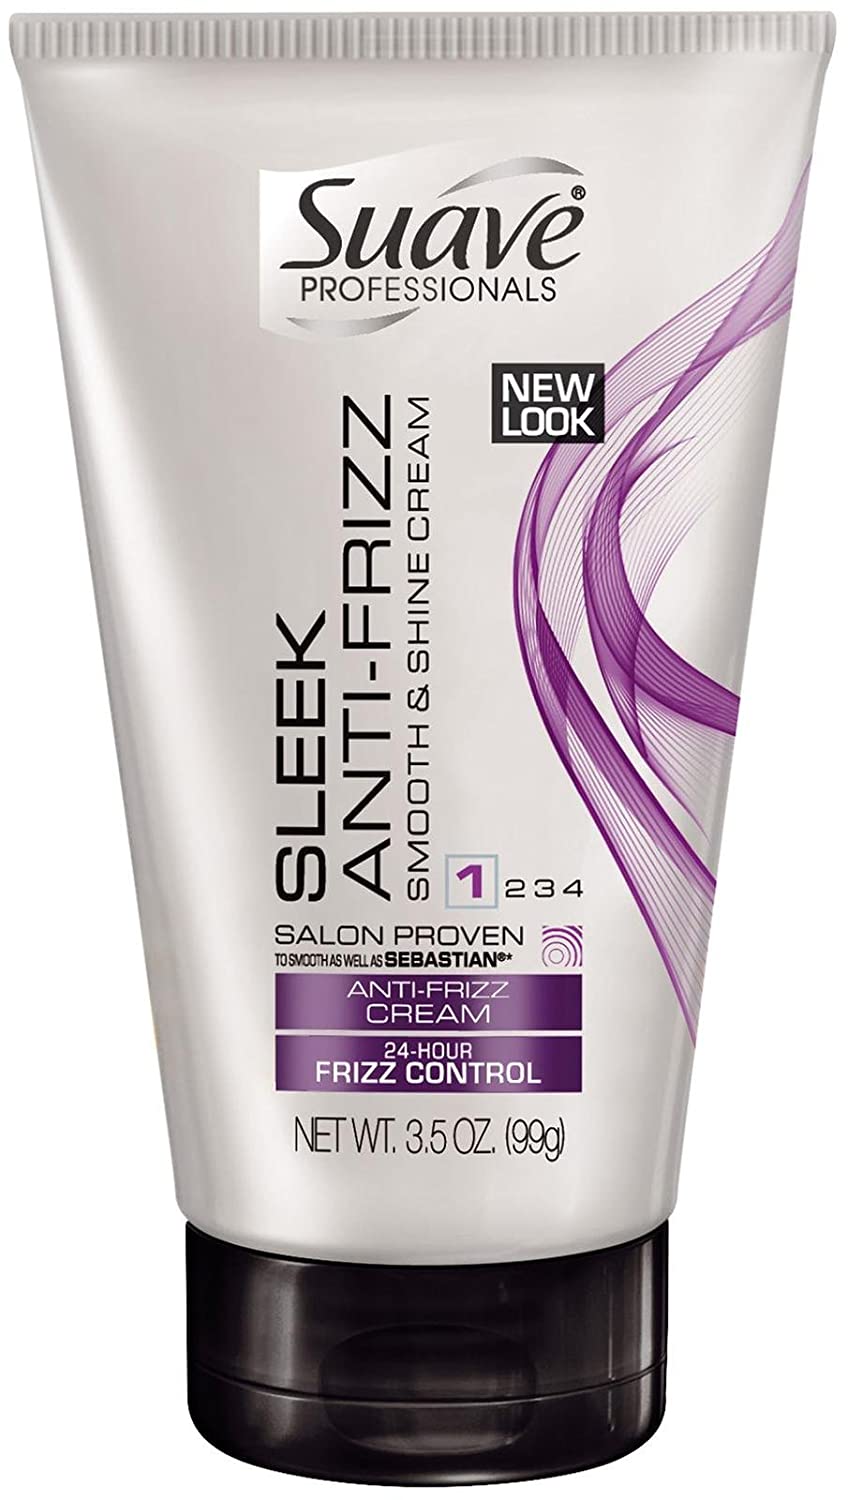 hair straightening products - Suave Professionals' Anti-Frizz Cream